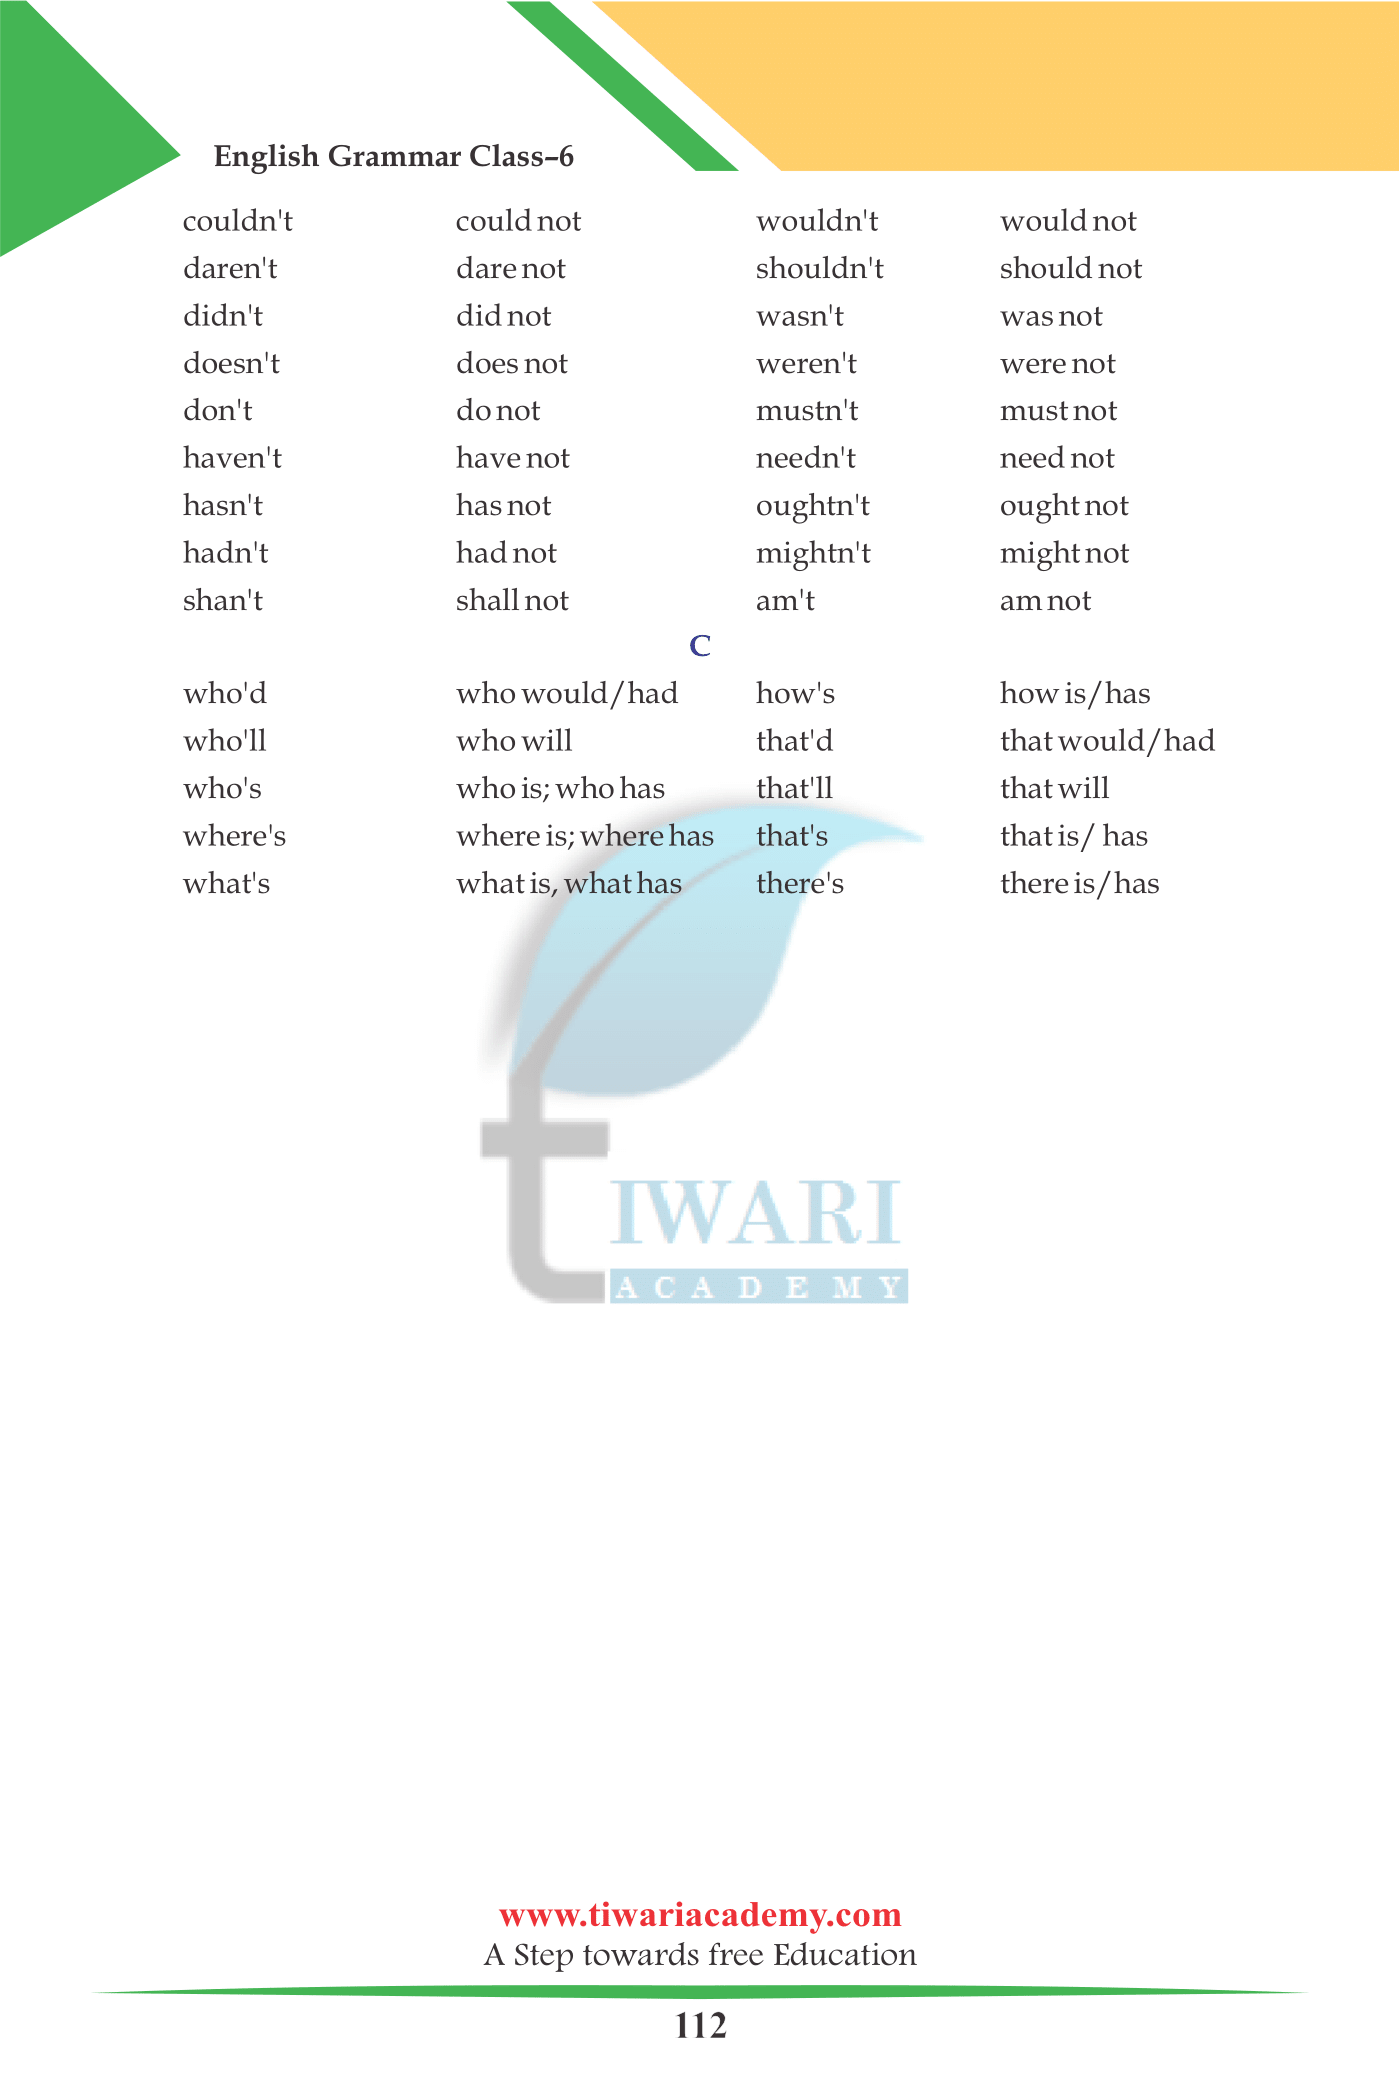 Class 6 English Grammar Chapter 25 Vocabulary and Word Power for 2022-2023